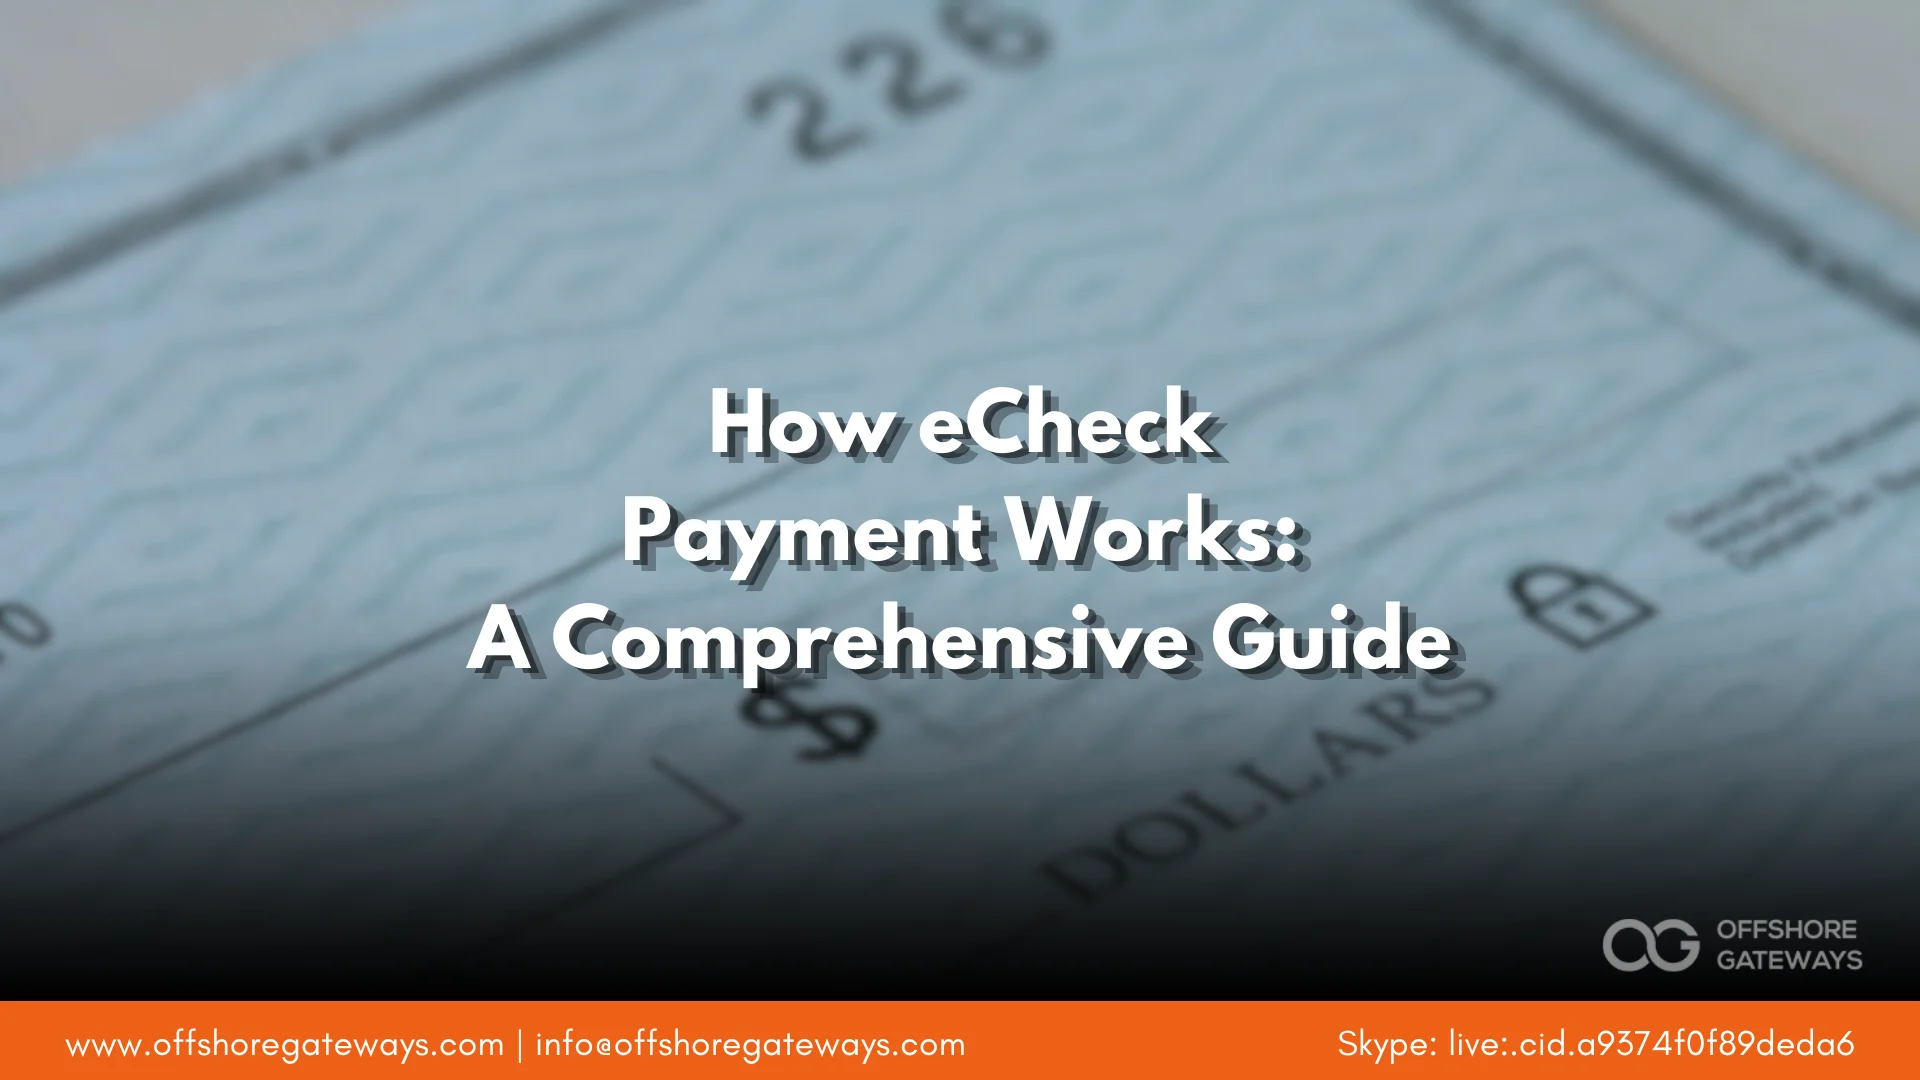 how-echeck-payment-works-guide-offshoregateways